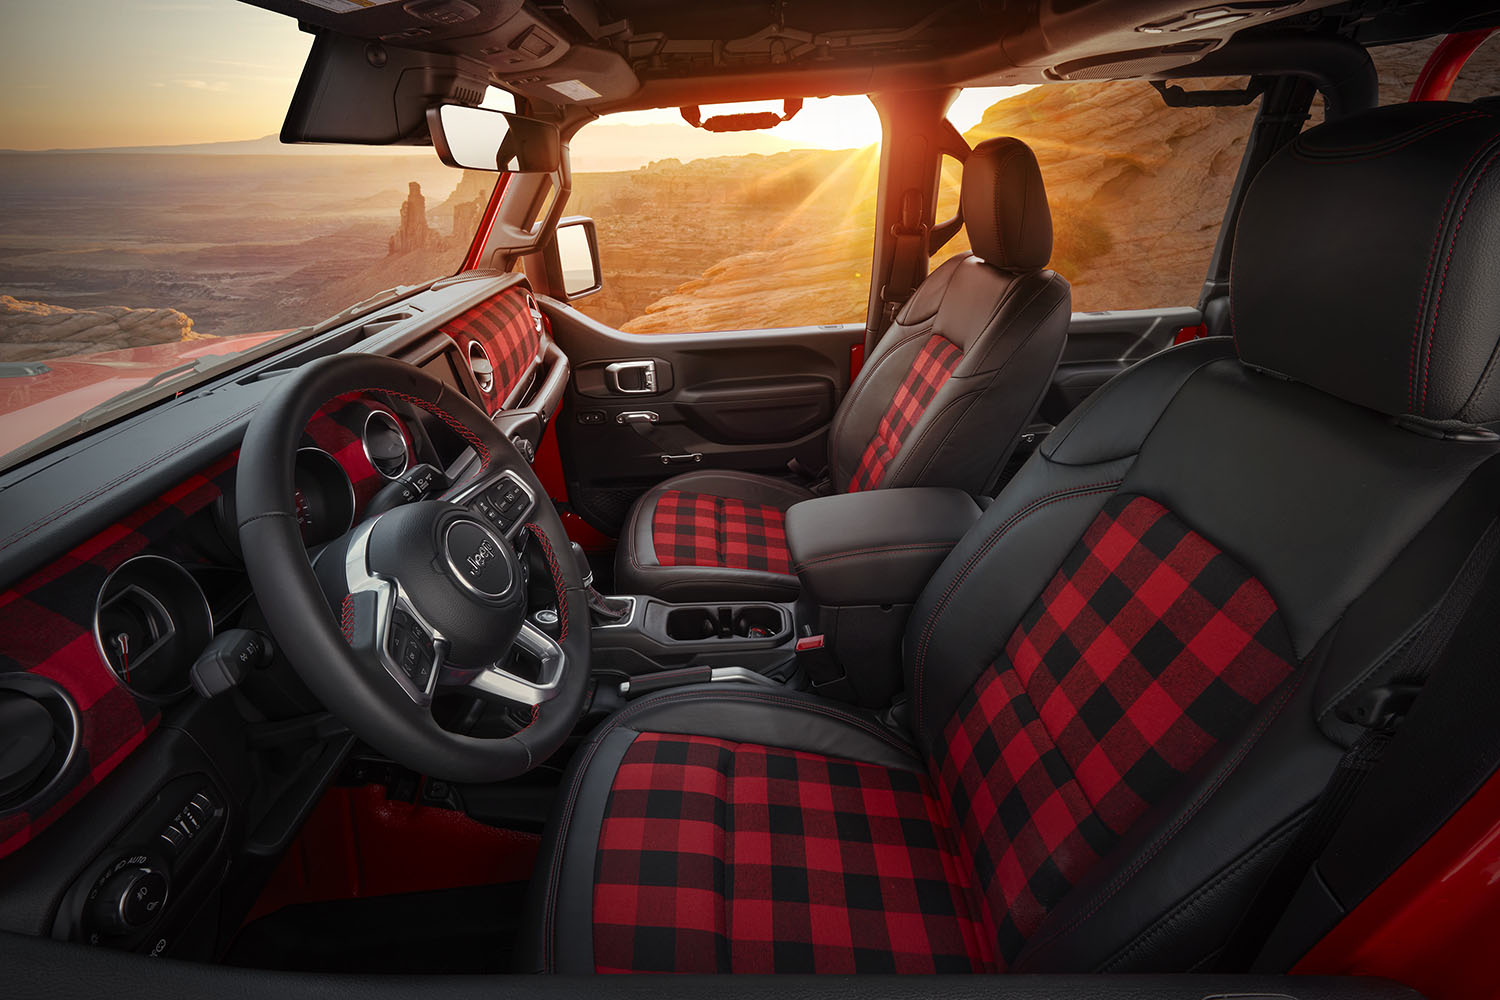 Jeep Gladiator front seat interior with black Katzkin seats of black leather and red-and-black plaid